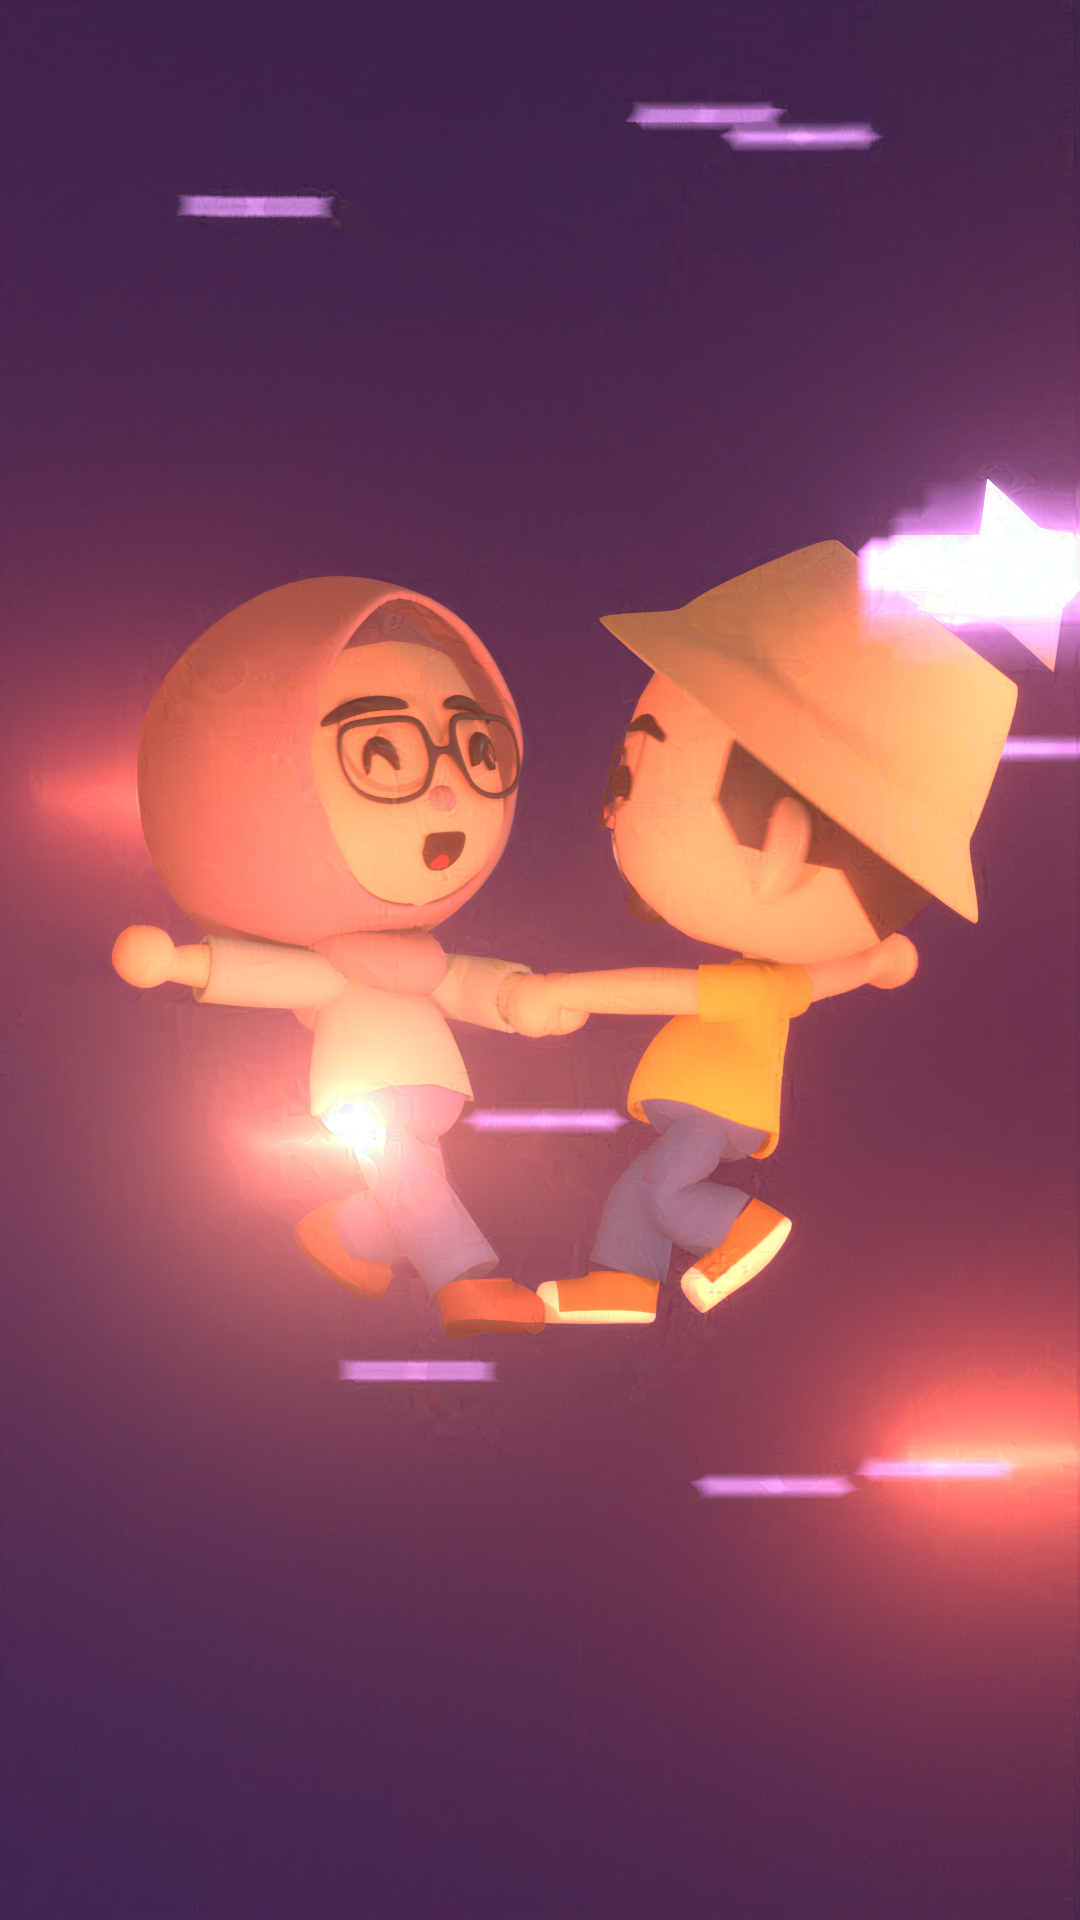 A pair of female and male cartoon figures dancing with streaks of light around them